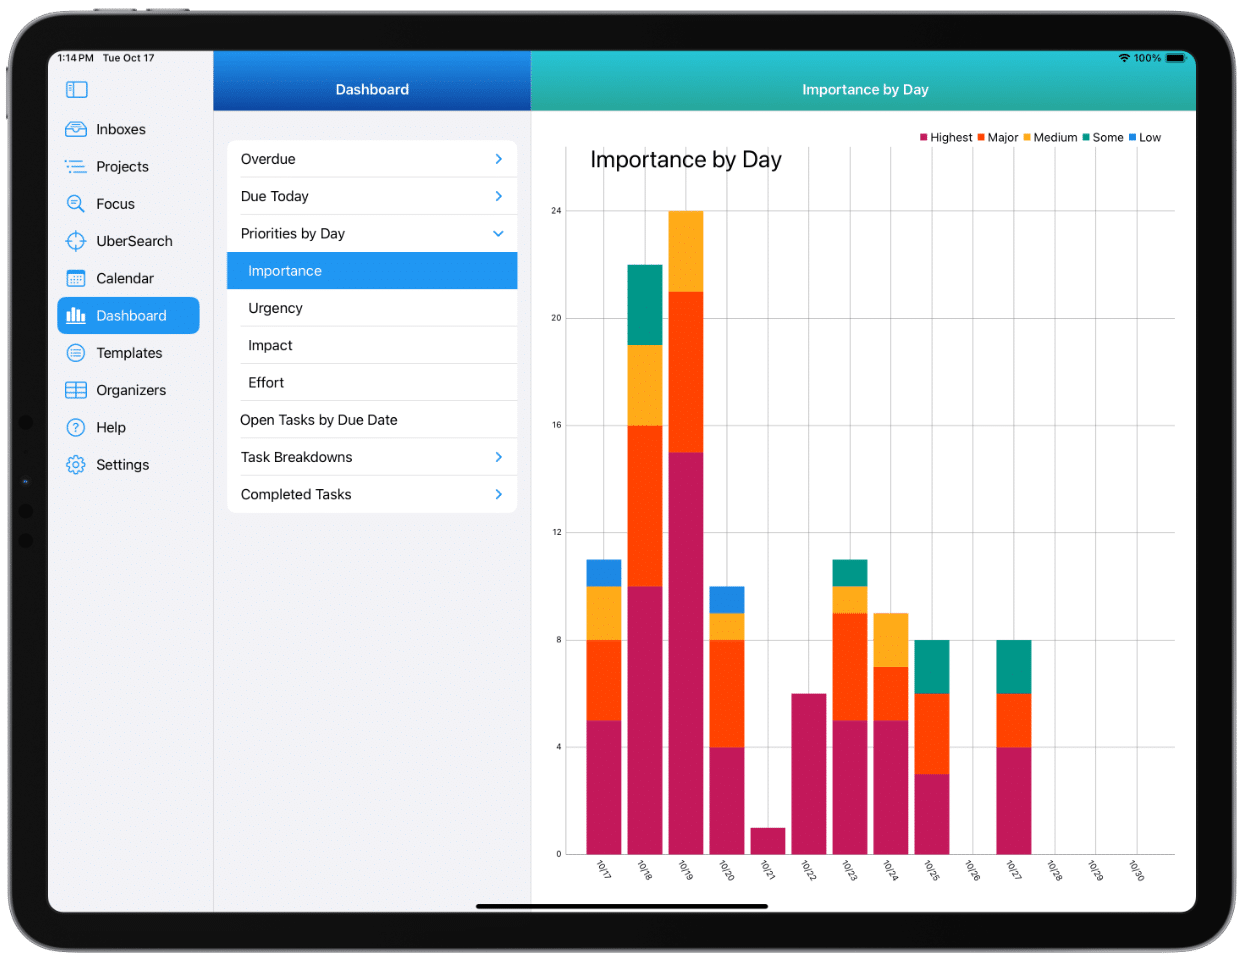 This image shows a Dashboard with Importance Levels By Day for the next 14 days on an iPad Pro.